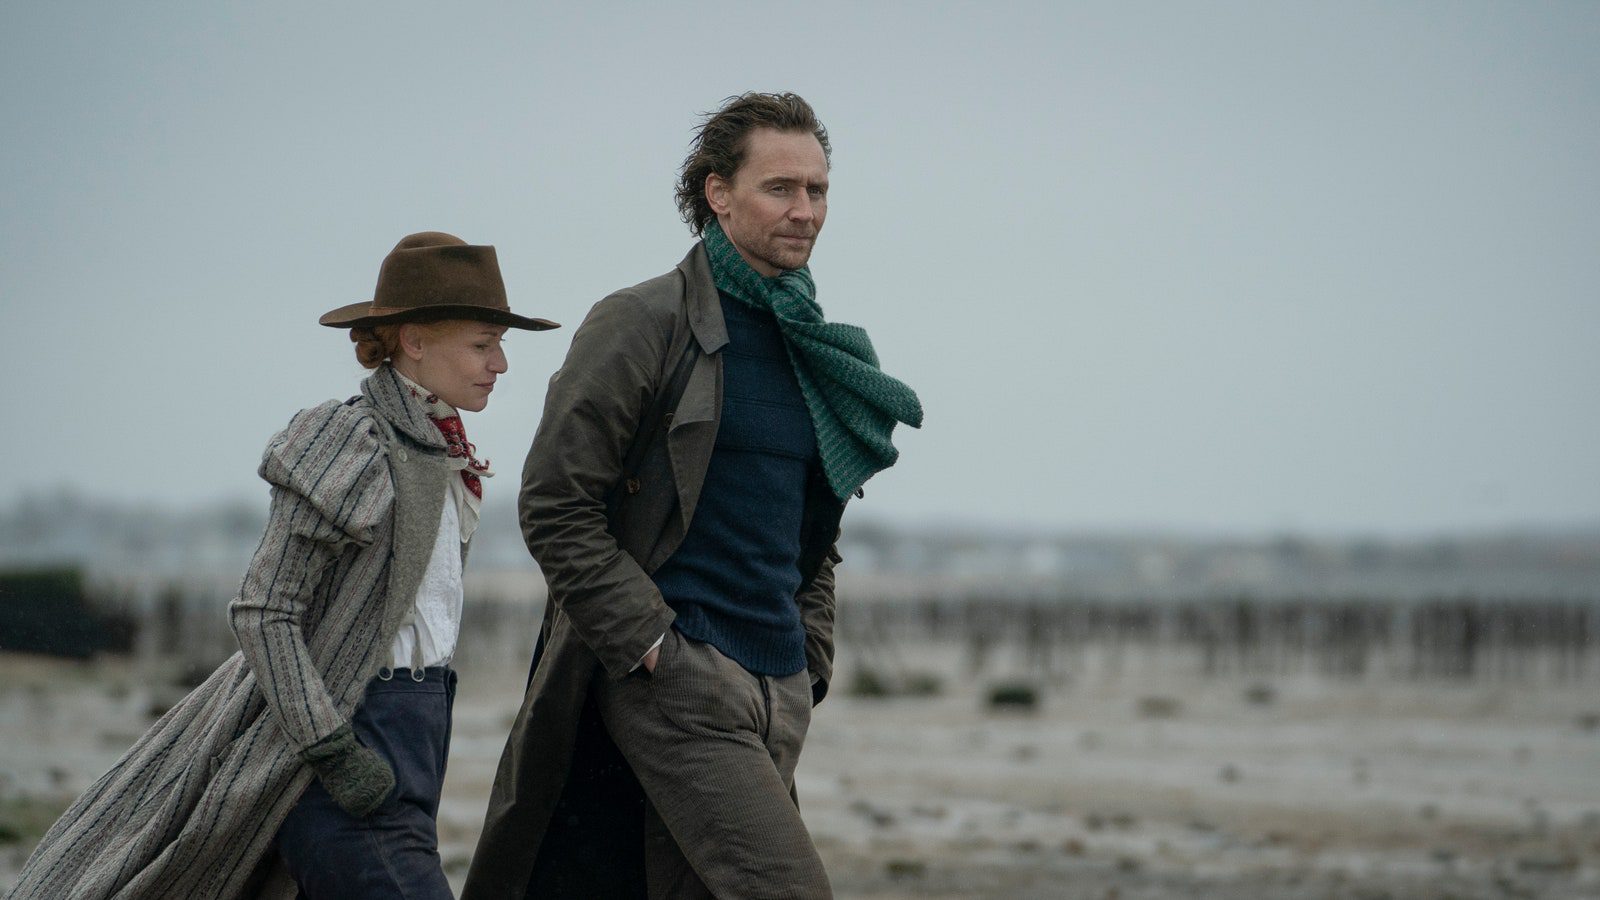 Image may contain clothing clothing tom hiddleston hat human person overcoat coat and sun hat